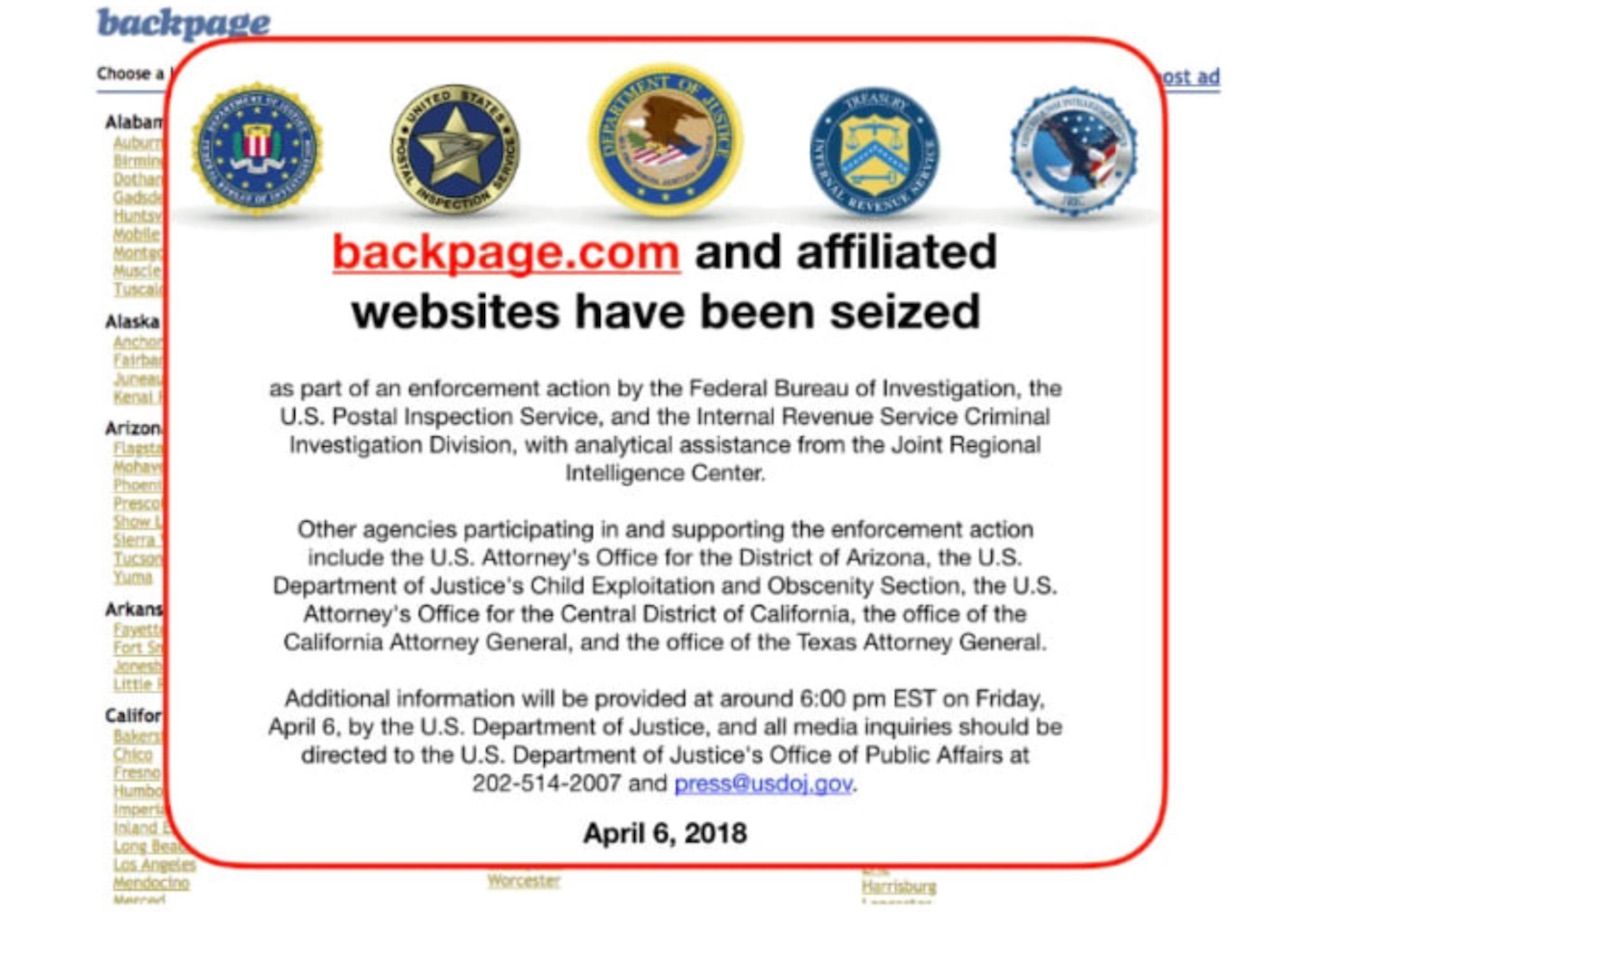 Backpage.com Reportedly ‘Seized’ By Federal Government